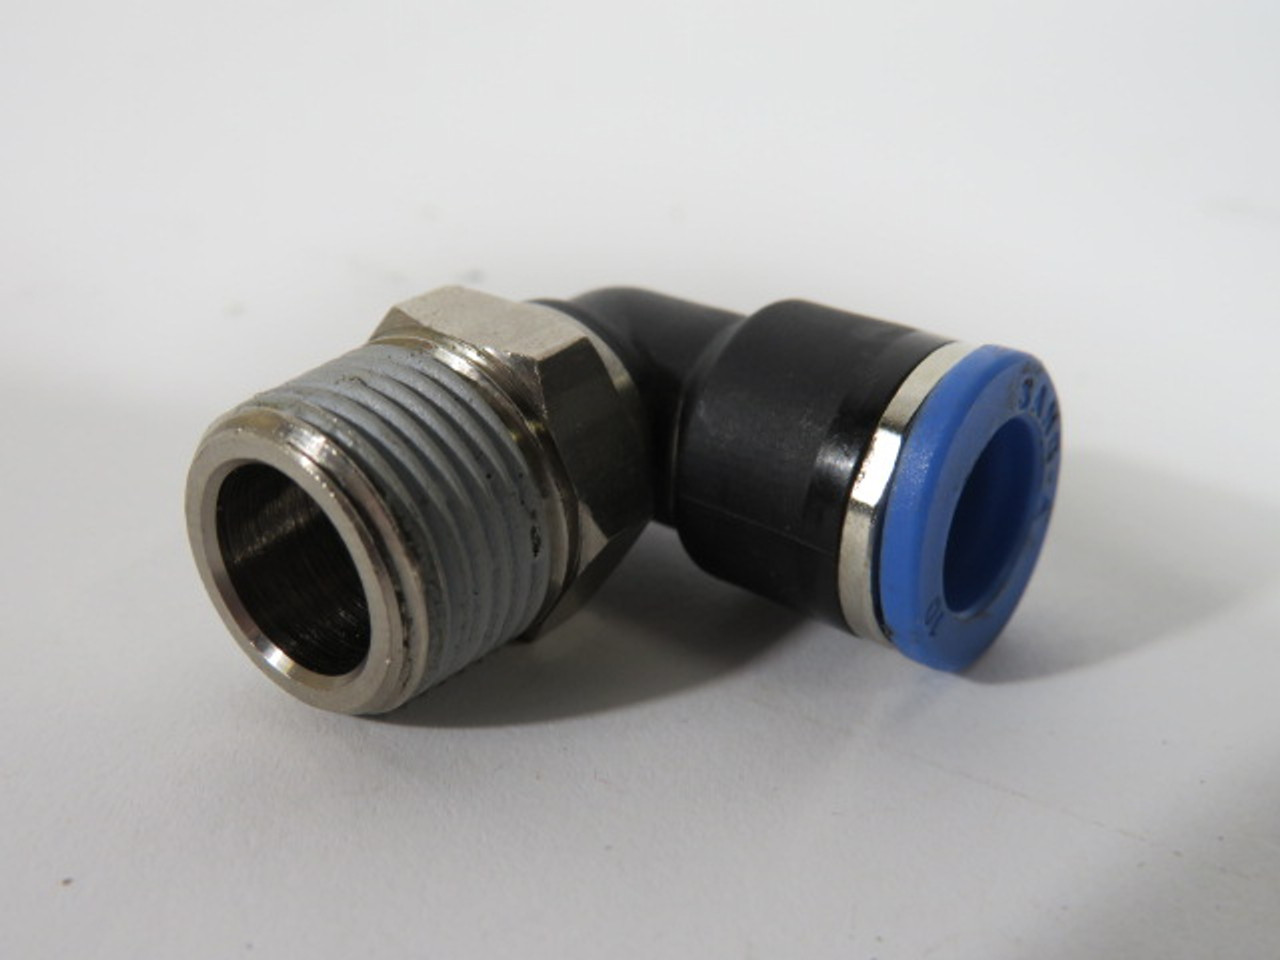 SANG-A PL-10-03 Male Elbow Pneumatic Fitting 3/8" NPT USED